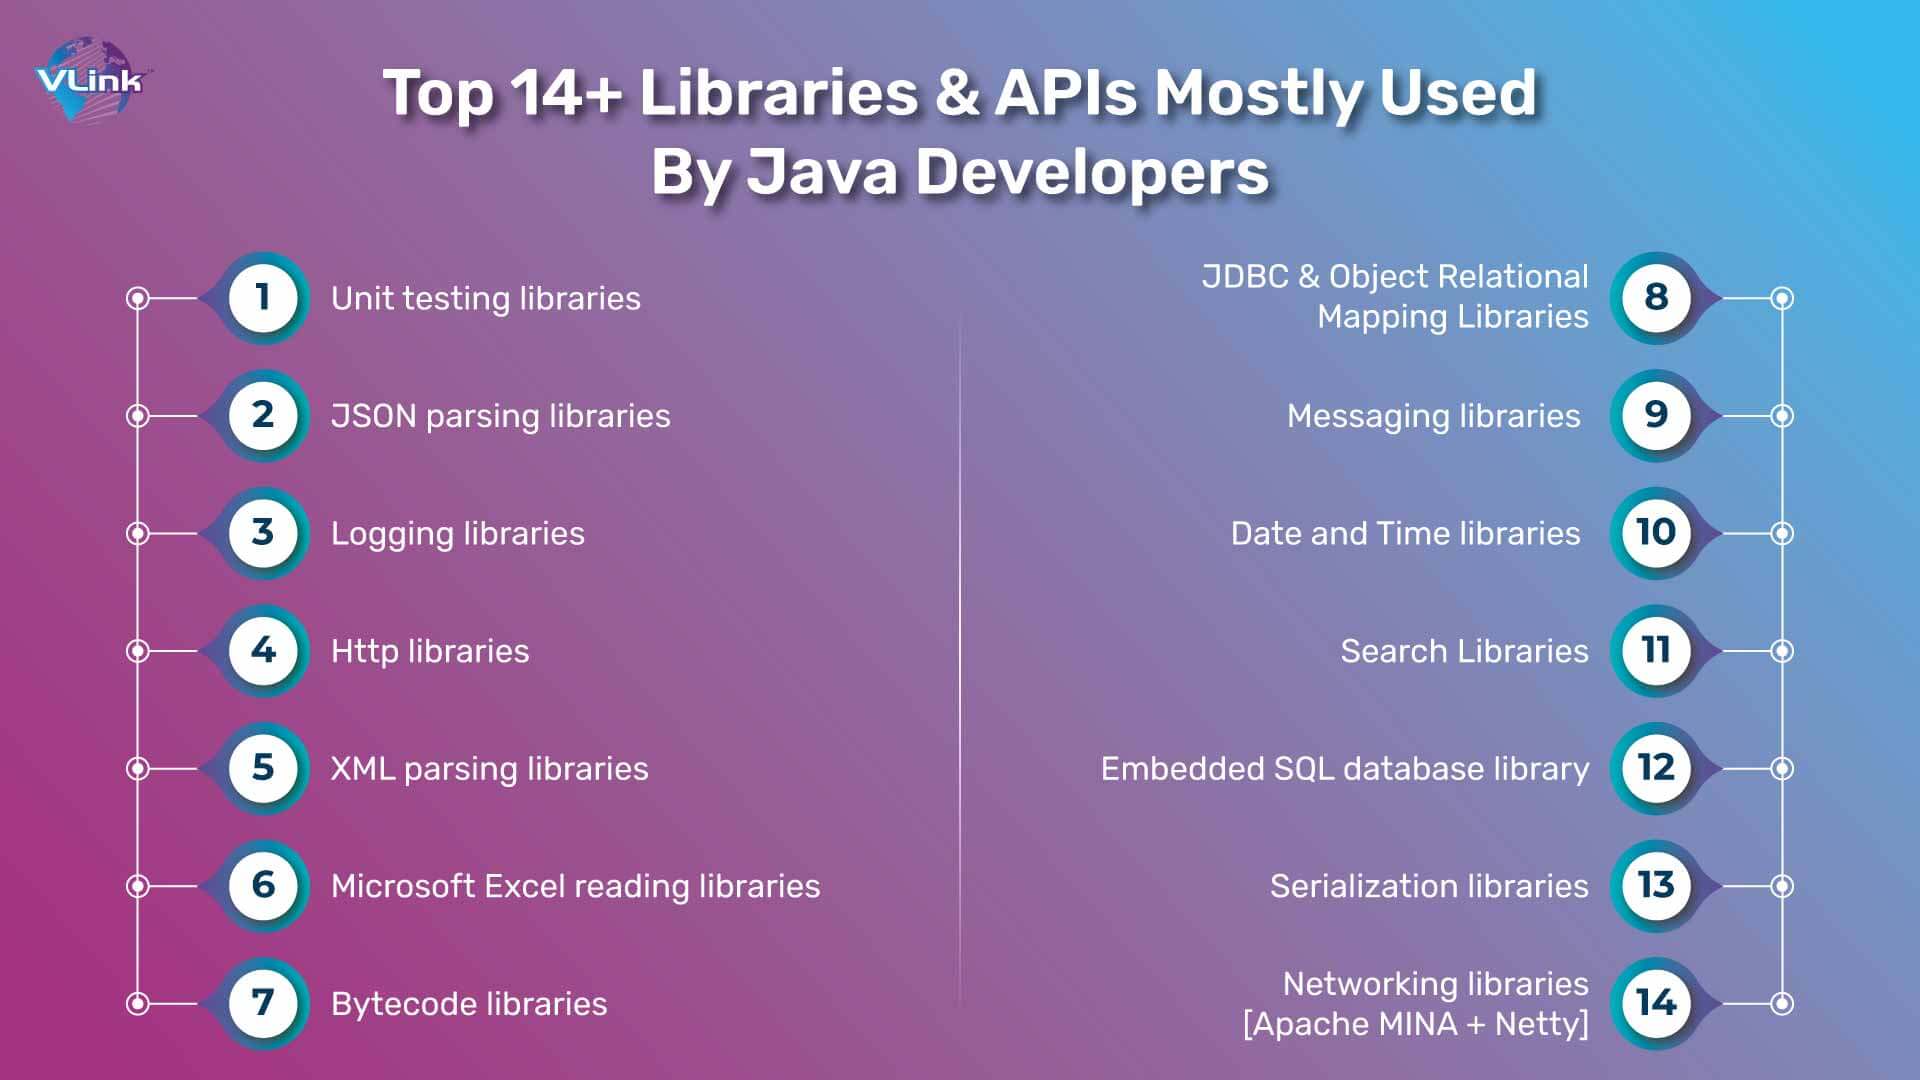 Most Popular Libraries and Their APIs Used By Java Developers 